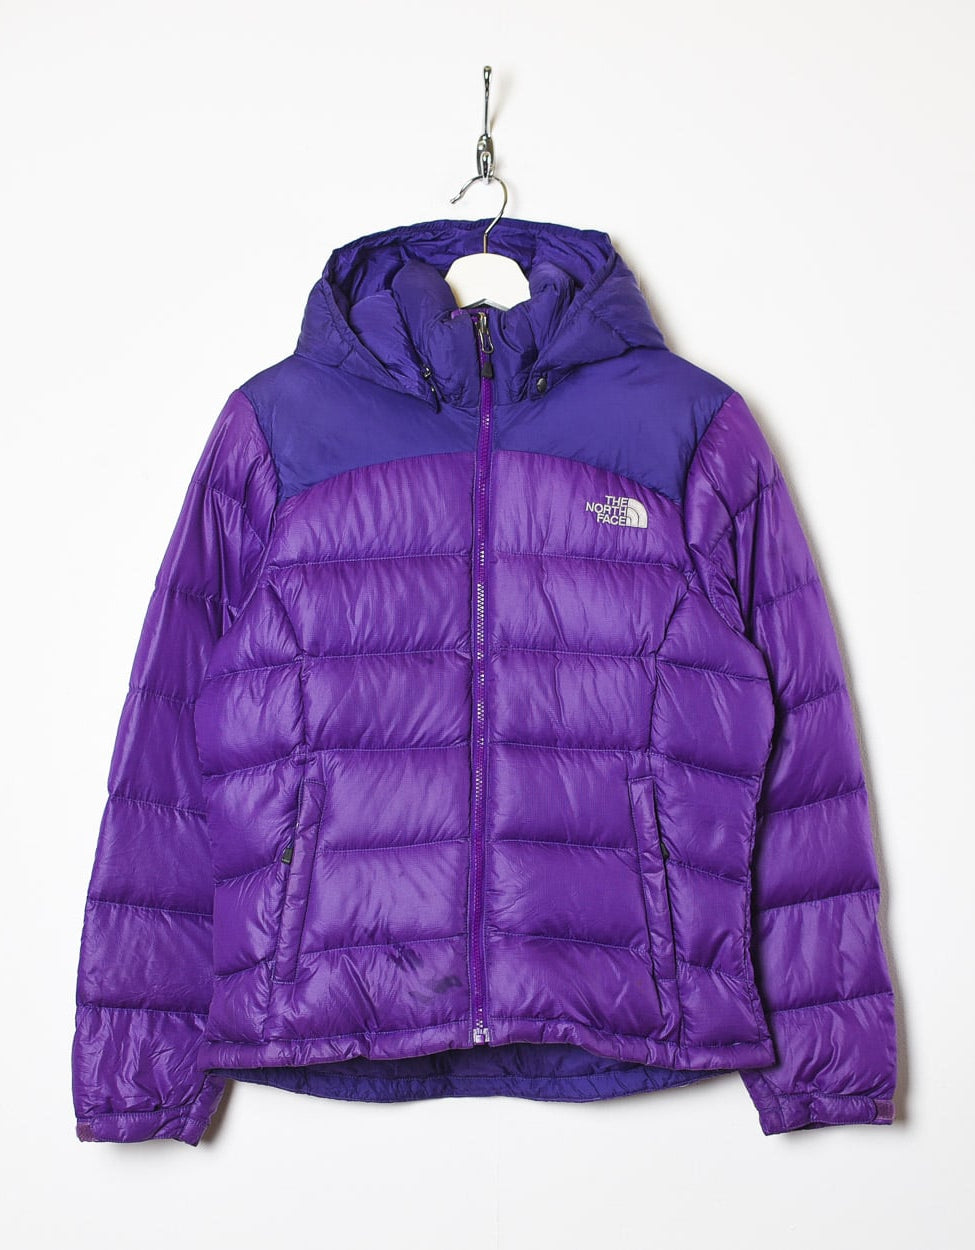 Purple The North Face Hooded Nuptse 700 Down Puffer Jacket - Large Women's